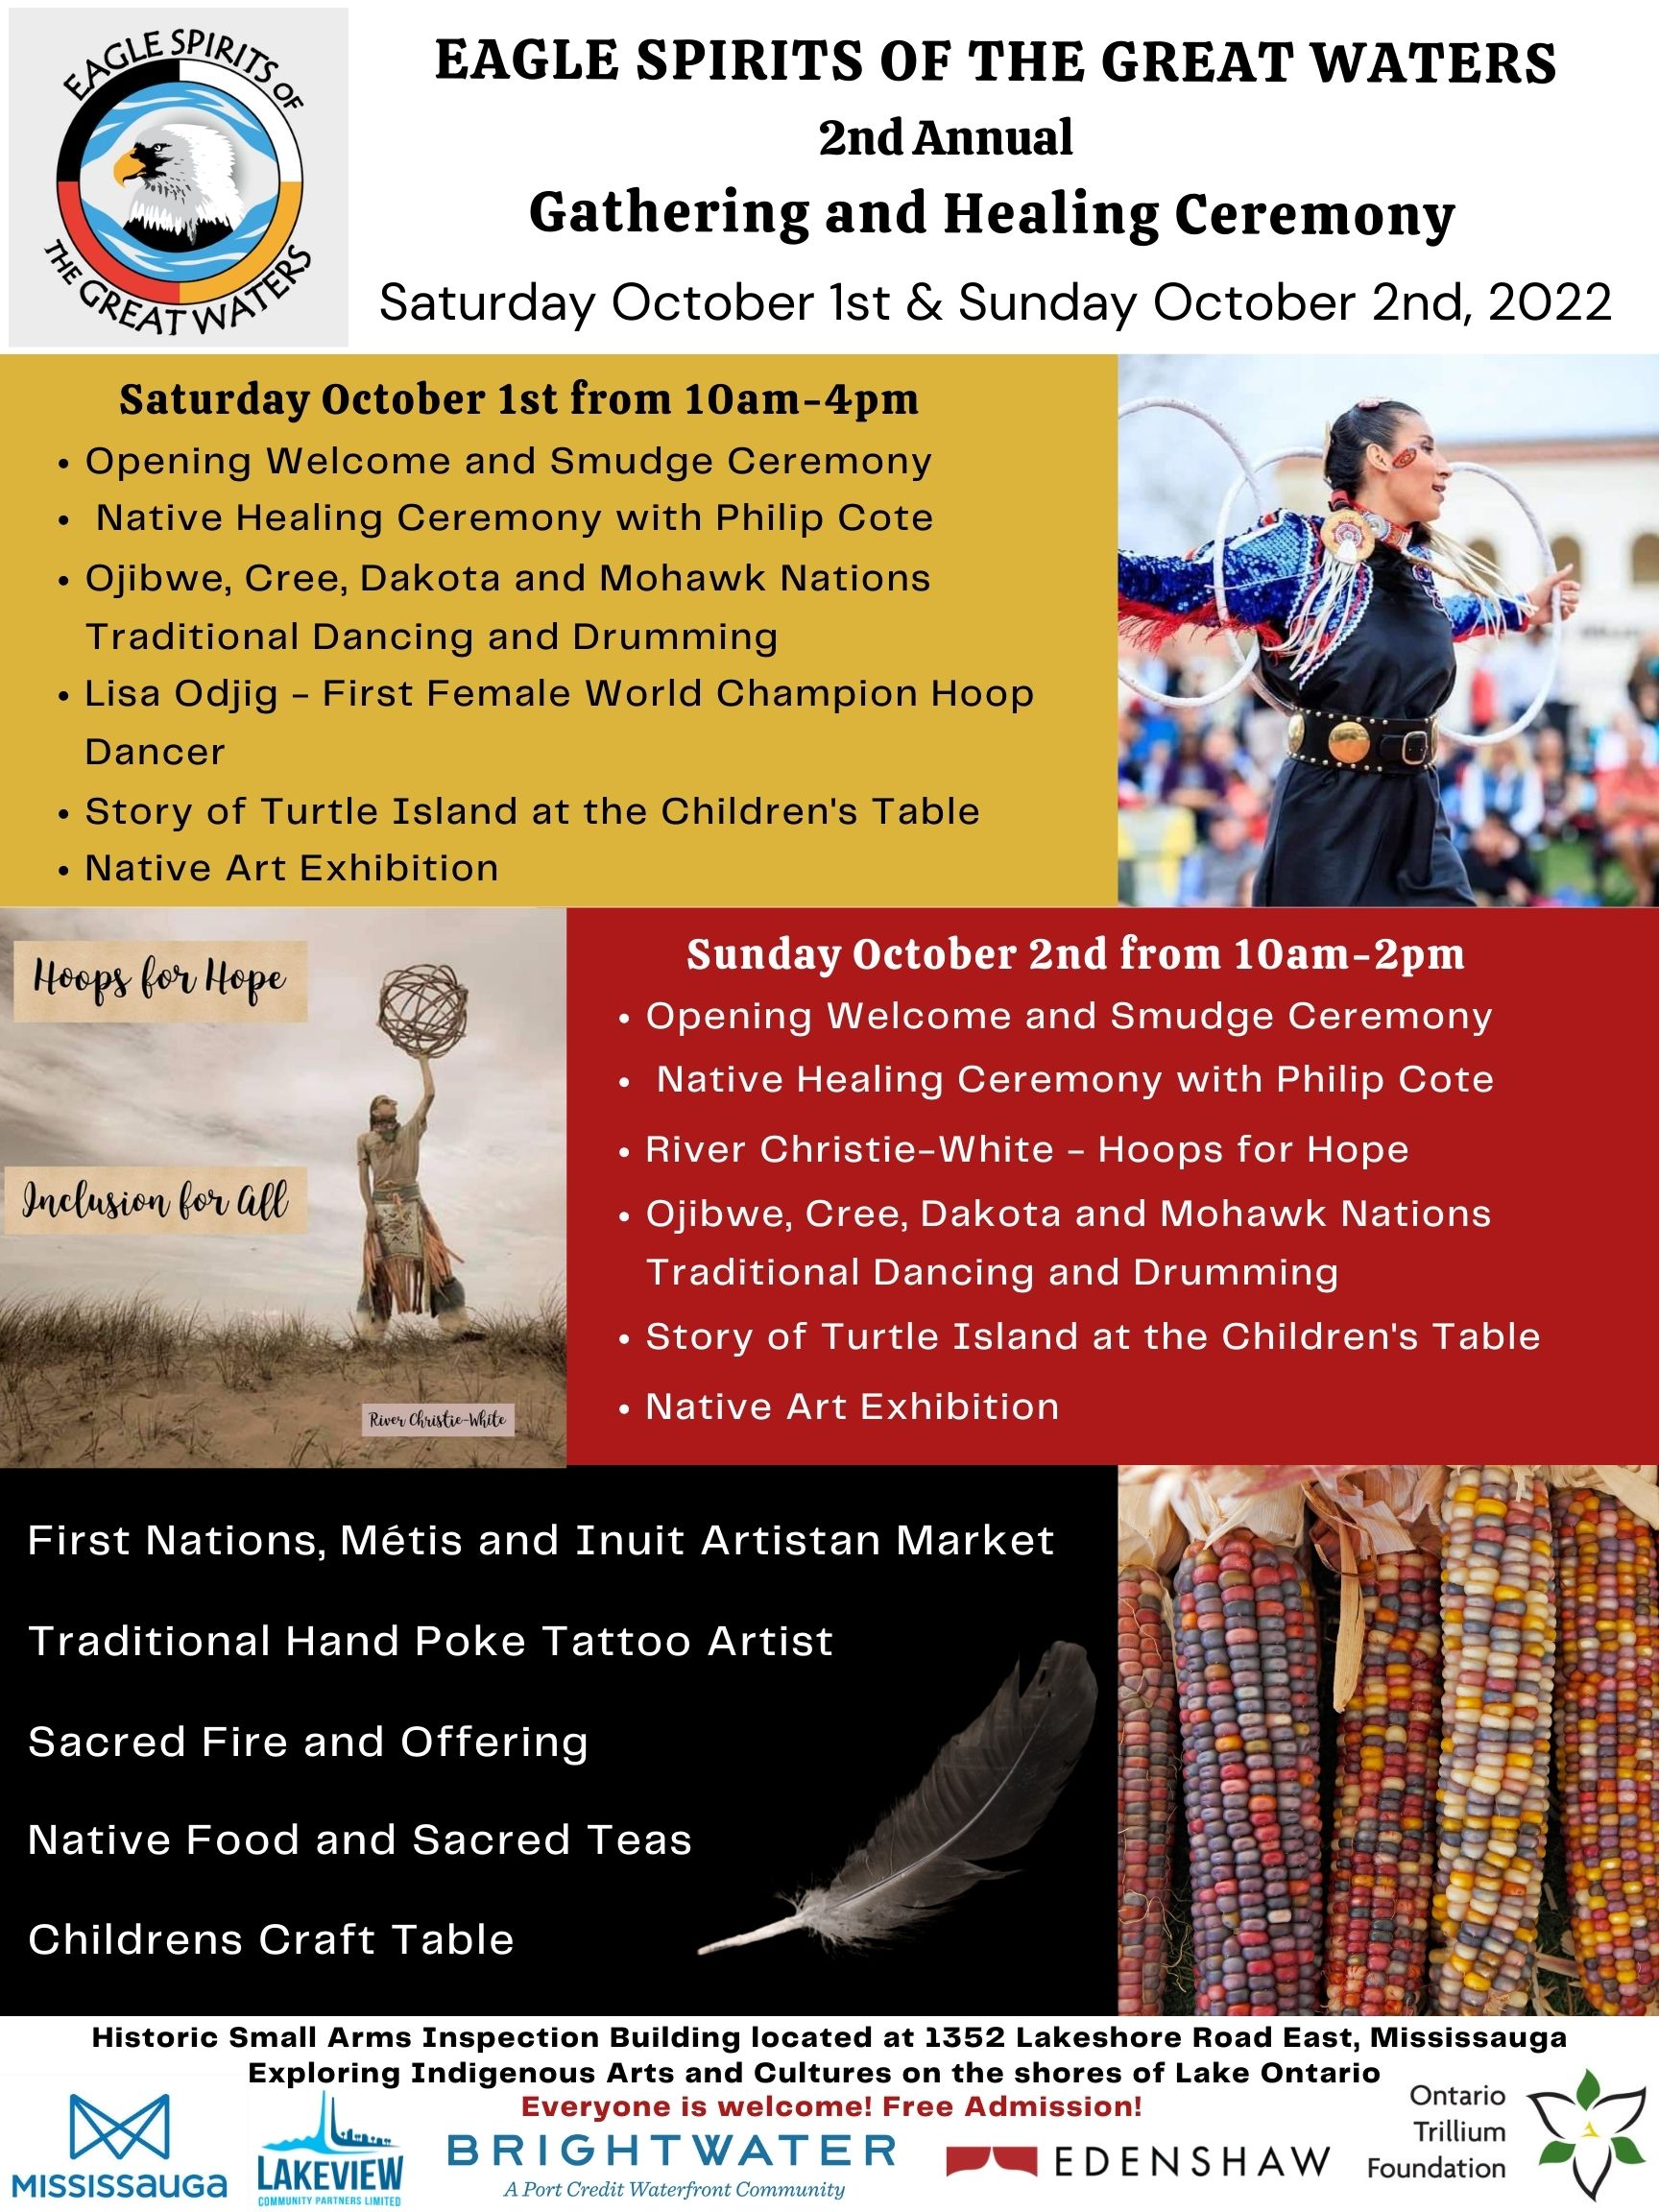 Eagle Spirits of the Great Waters 2nd Annual Gathering and Healing Ceremony
Saturday October 1st & Sunday October 2nd
 
 
*Yellow Background*
Sat October 1st from 10am-4pm

Opening Welcome and Smudge Ceremony
Native Healing Ceremony with Phillip Cote
Ojibwee, Cree, Dakota, and Mohawk Nations’ traditional Dancing and Drumming
Lisa Odjig – First Female World Champion Hoop dancer
Story of Turtle Island at Children’s table
Native Art Exhibition
 
*Red Background*
Sun October 2nd from 10am-2pm
 
Opening Welcome and Smudge Ceremony
Native Healing Ceremony with Phillip Cote
River Christie-White – Hoops for Hope
Ojibwee, Cree, Dakota, and Mohawk Nations’ traditional Dancing and Drumming
Story of Turtle Island at Children’s table
Native Art Exhibition
 
*Black Background*
First Nations, Métis, and Inuit Artisan Market
Traditional Hand Poke Tattoo Artist
Sacred Fire and Offering
Native Food and Sacred Teas
Children’s Craft Table
Native Art Exhibition
 
*White Background at bottom*
Historic Small Arms Inspection Building located at 1352 Lakeshore Road East, Mississauga
Exploring Indigenous Arts and Cultures on the shores of Lake Ontario
Everyone is welcome! Free Admission!
 
*Sponsors’ logos, left to right*
City of Mississauga, Lakeview Community Partners, Brightwater a Port Credit Waterfront Community Development, Edenshaw, Ontario Trillium Foundation*
